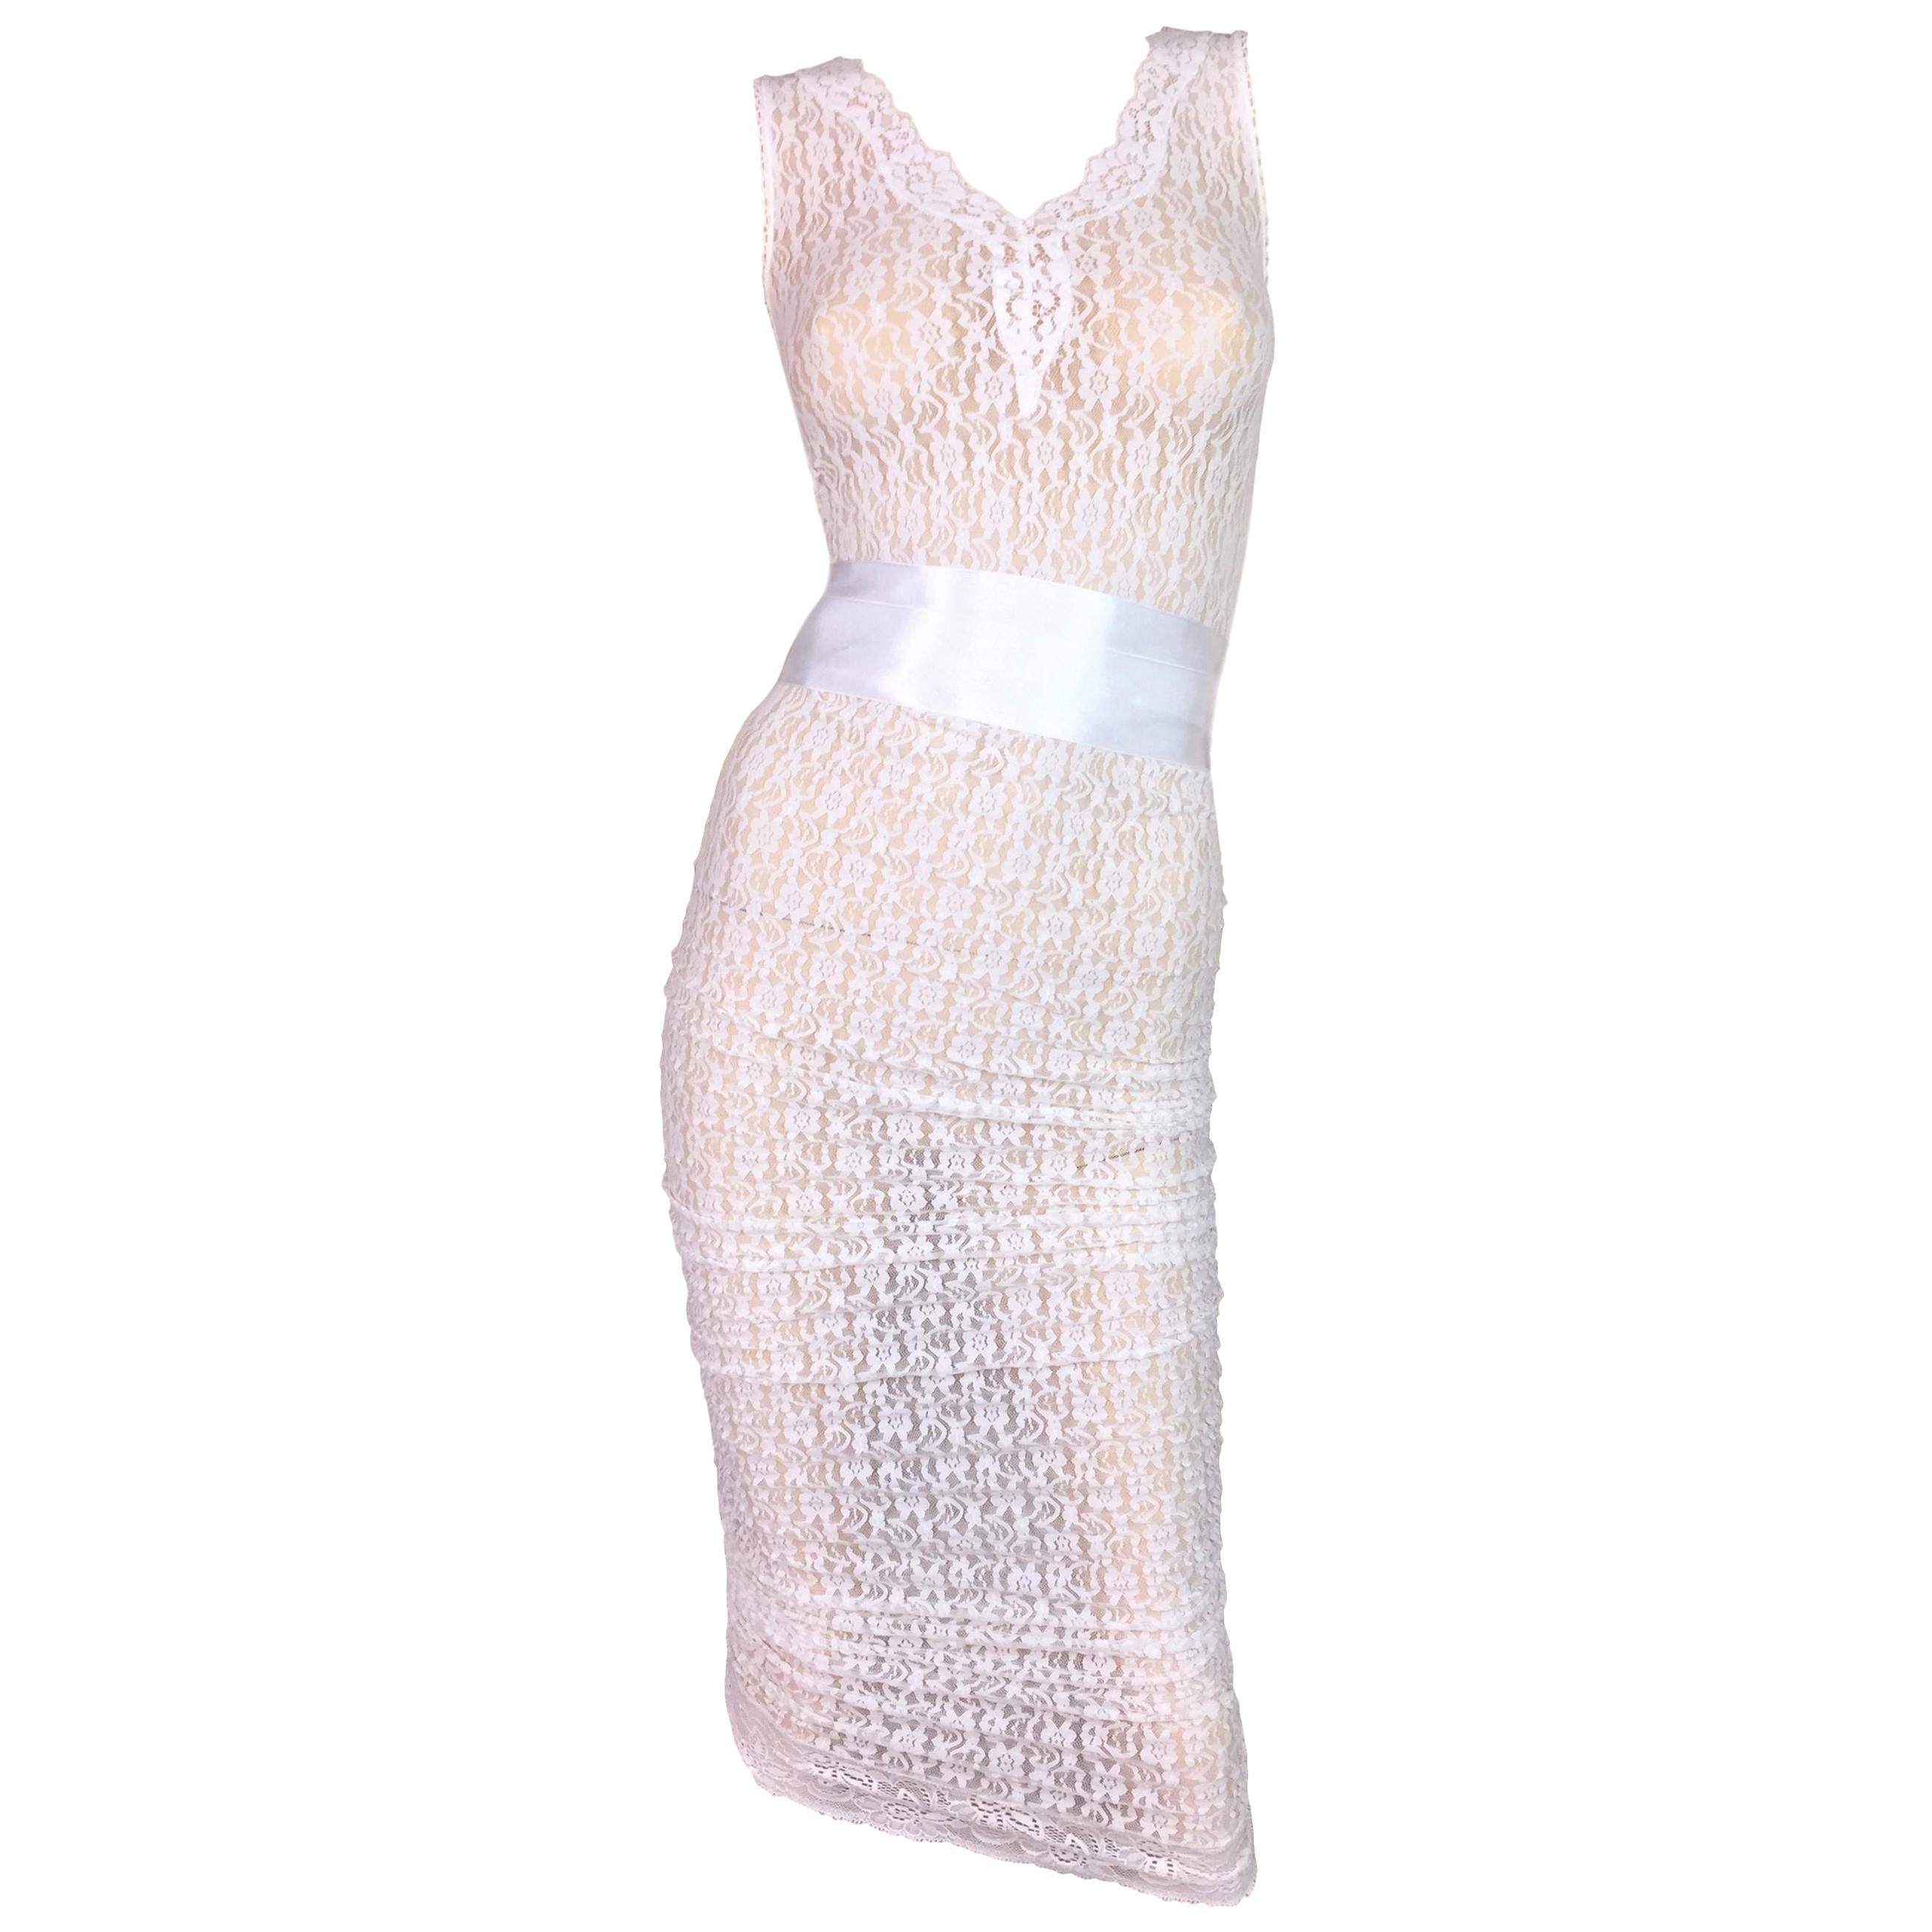 S/S 2006 NWT D&G by Dolce & Gabbana Runway Sheer White Lace Wiggle Dress